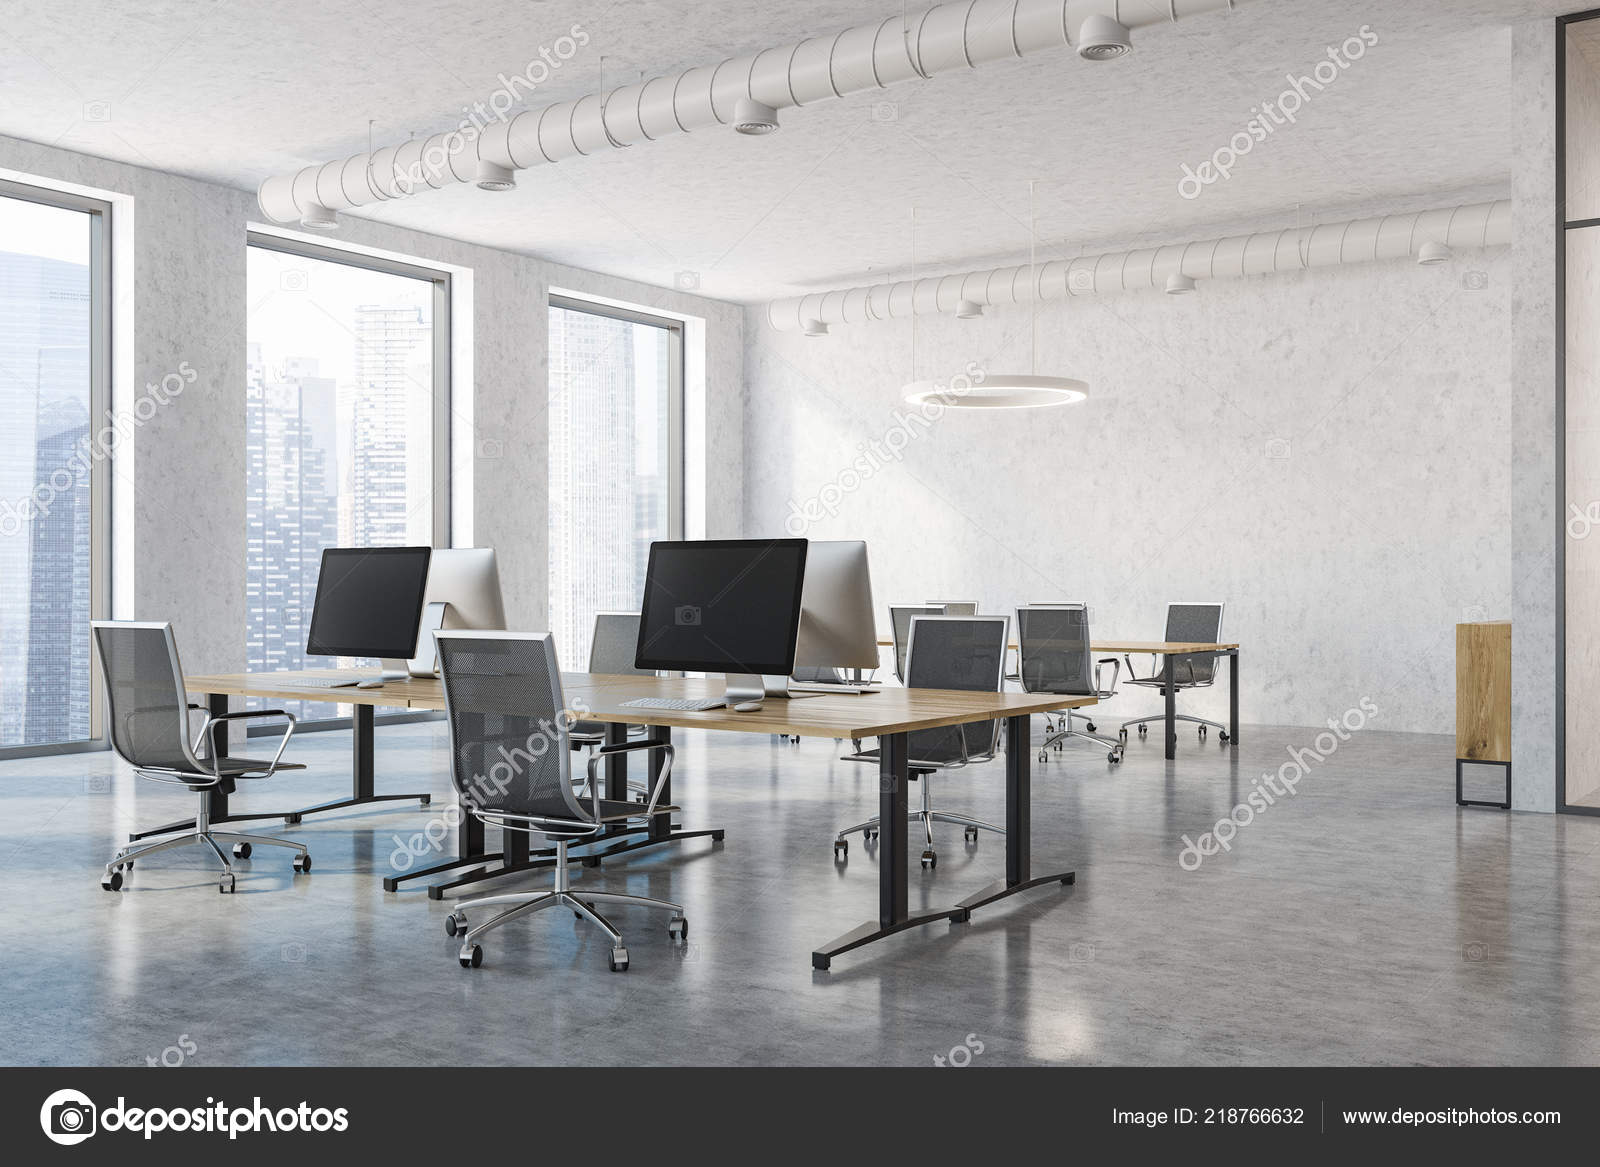 Industrial Style Office Interior Concrete Walls Floor Pipes